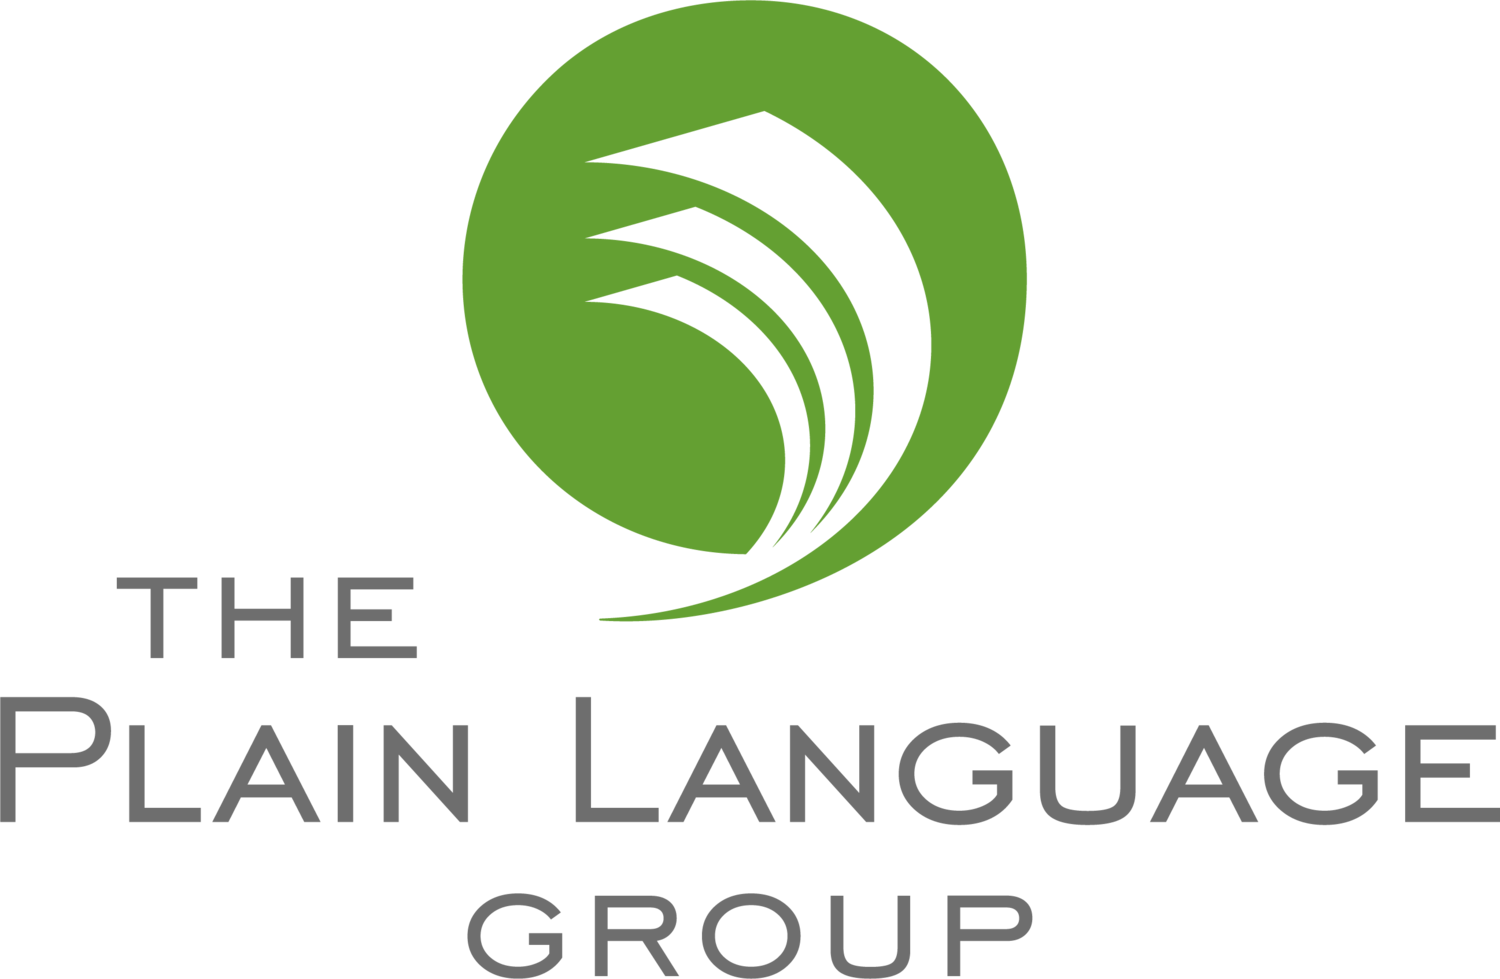 The Plain Language Group - We make written content easy to understand